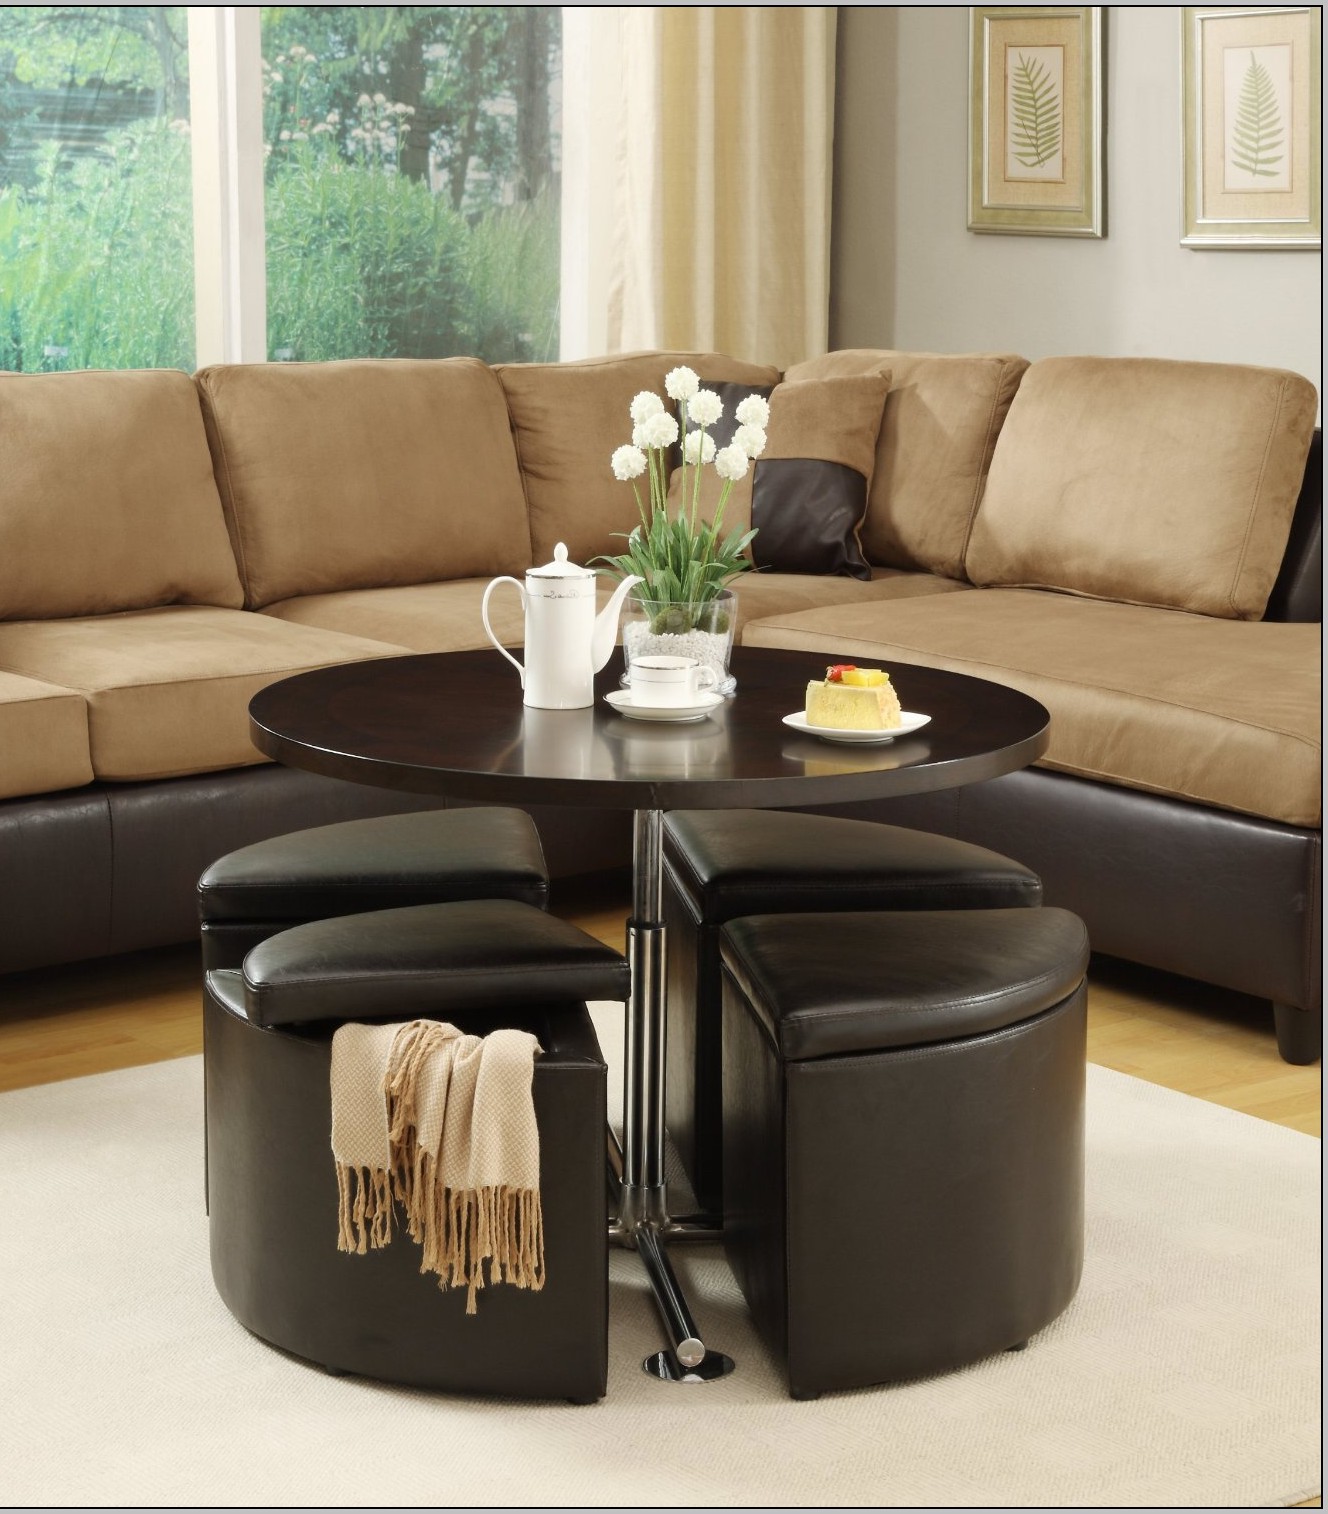 35+ how to style a round coffee table tray Round coffee table with seats underneath